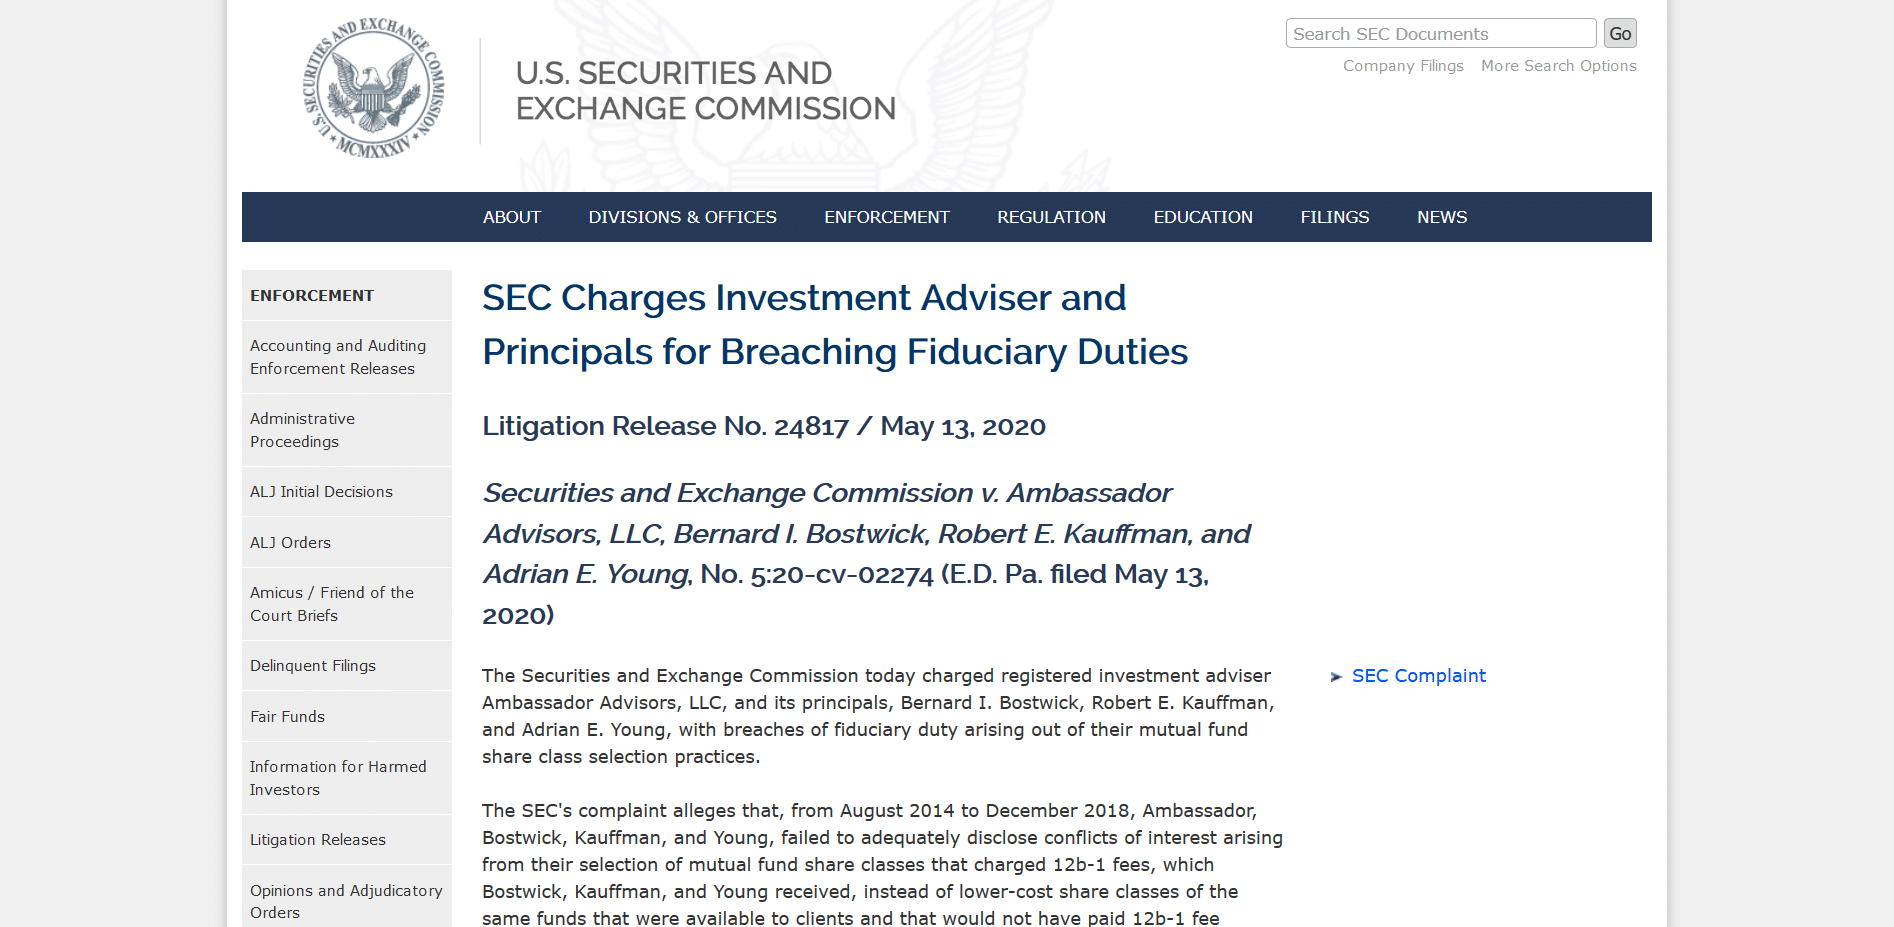 SEC Charges Investment Adviser and Principals for Breaching Fiduciary Duties